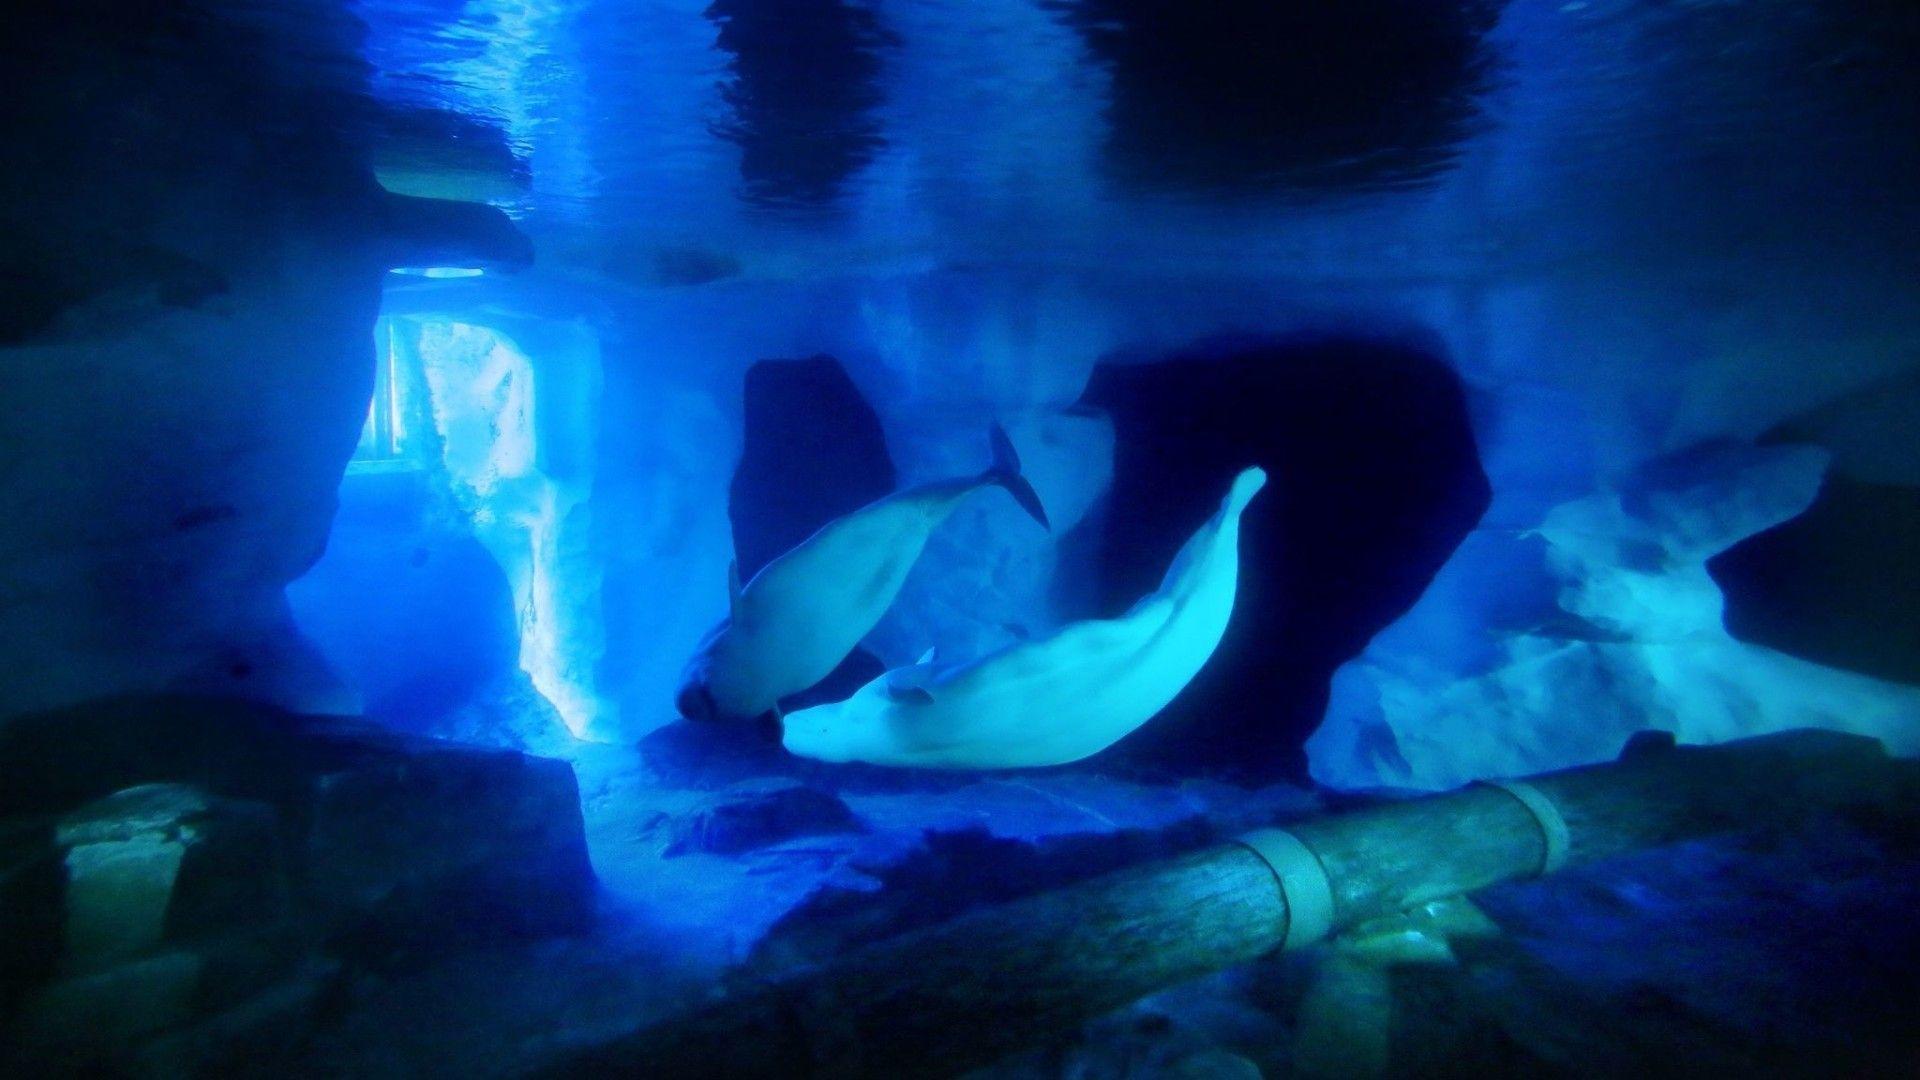 With SeaWorld Orlando's beluga whales, guests get a glimpse